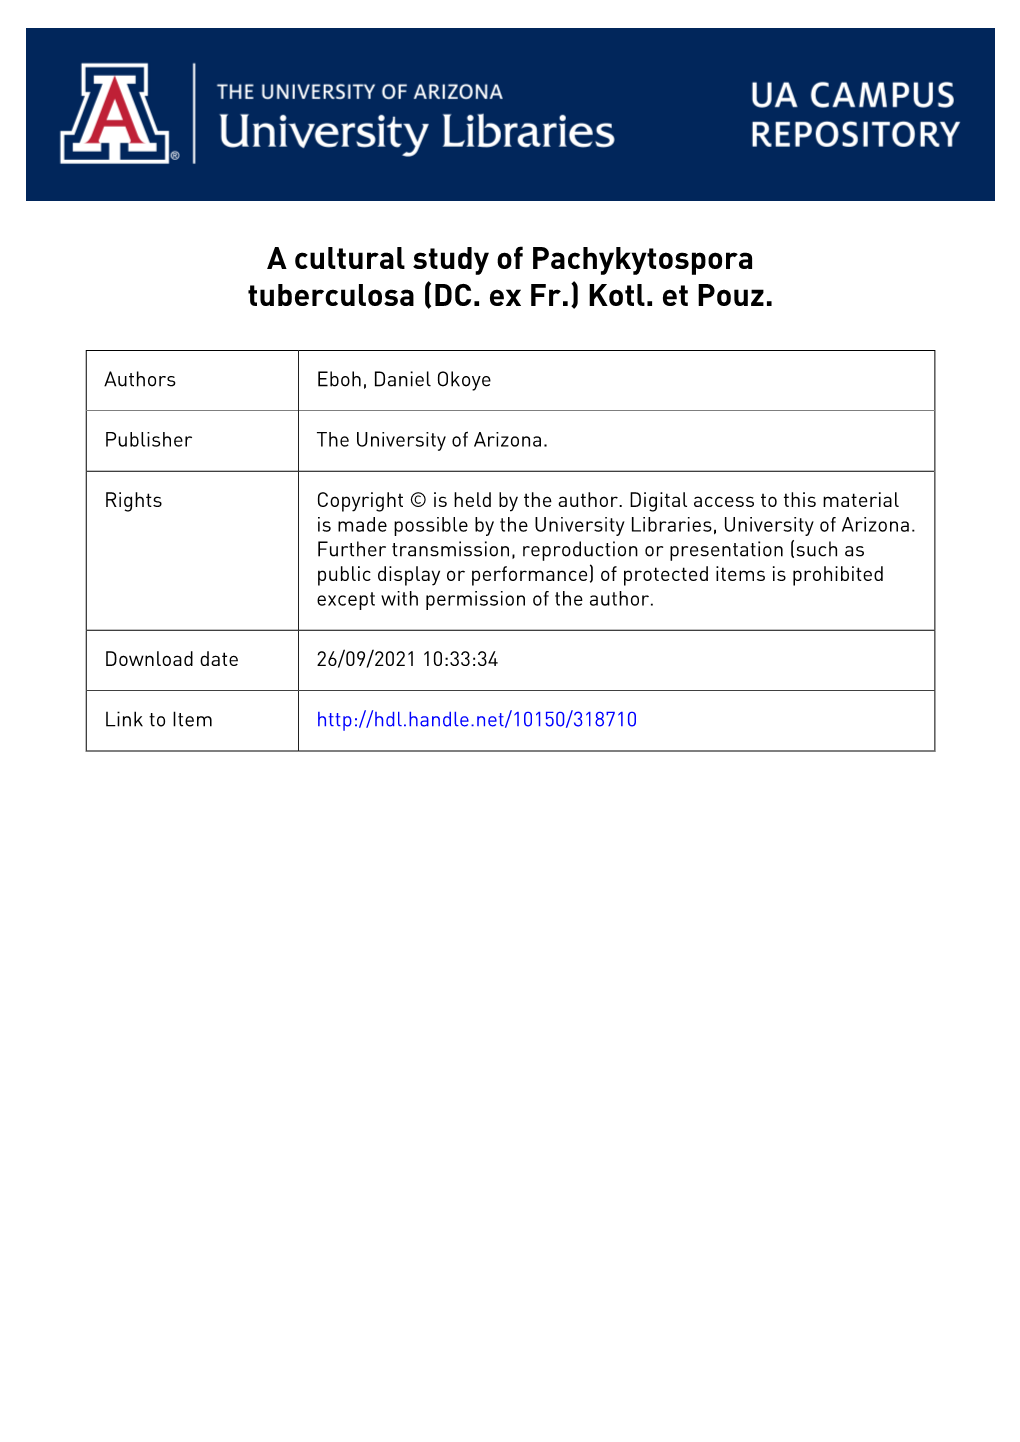 A Cultural Study of Paceykytospora Tuberculosa (Dc